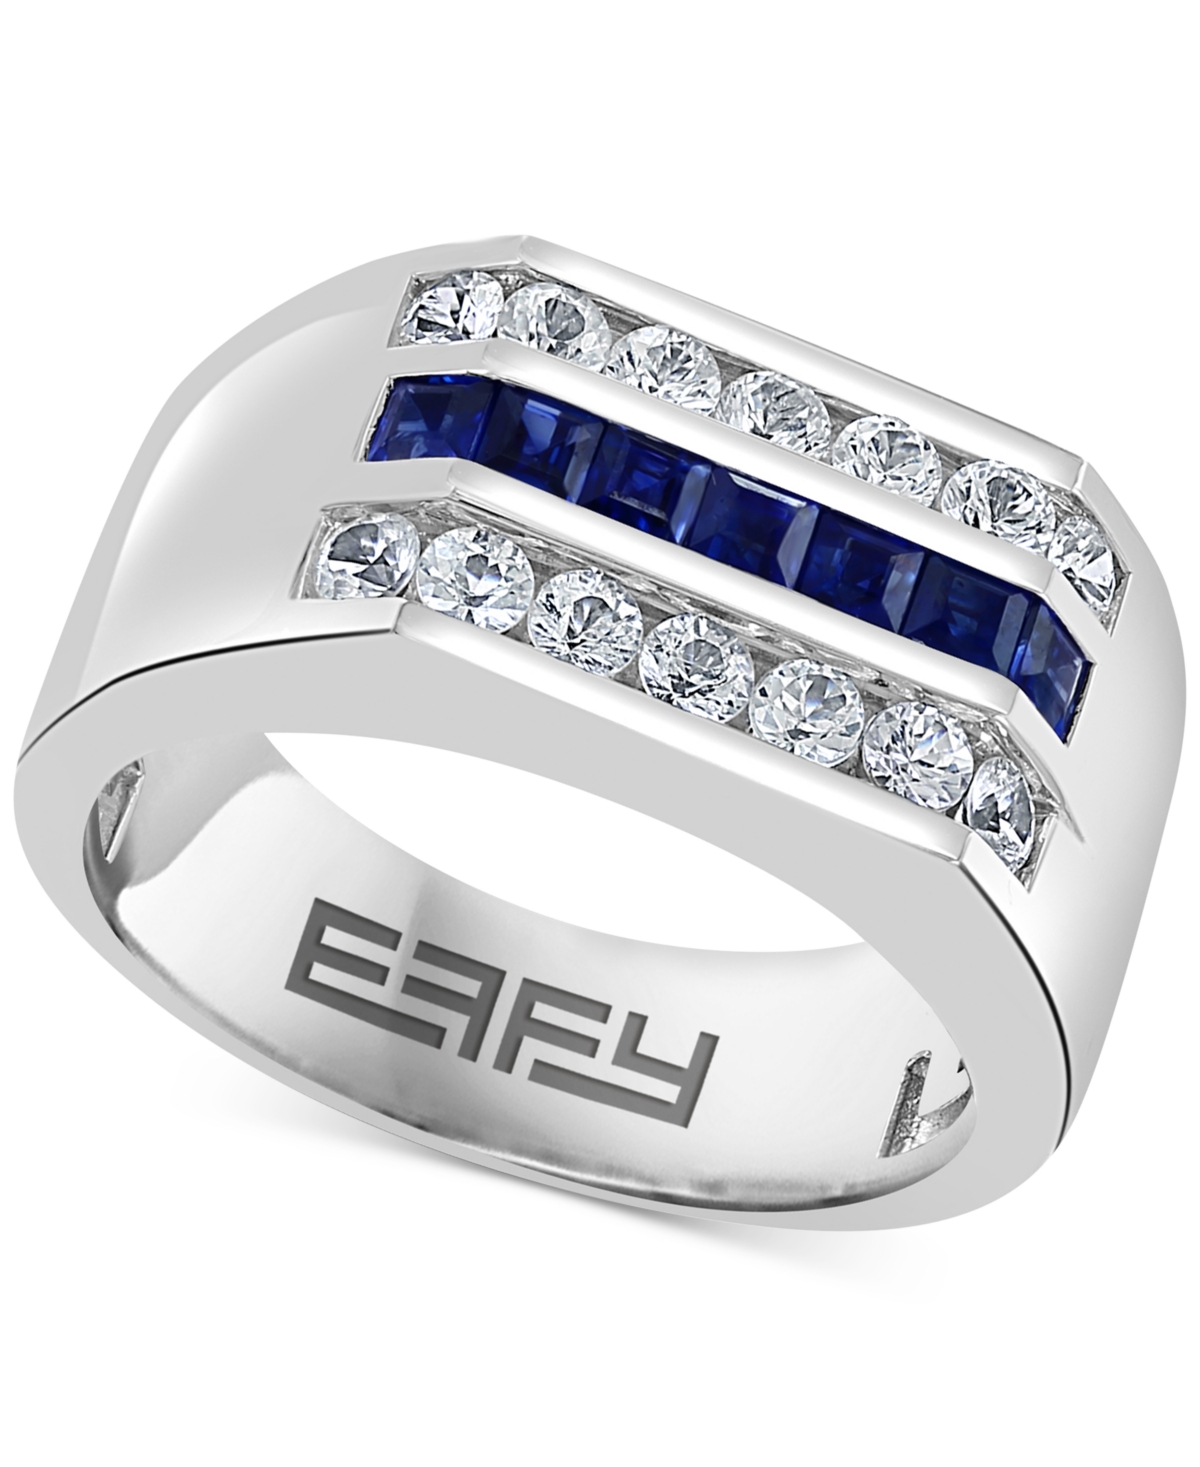 Effy Men's Blue Sapphire (7/8 ct. t.w.) & White Sapphire (1-1/4 ct. t.w.) Ring in Sterling Silver - Silver